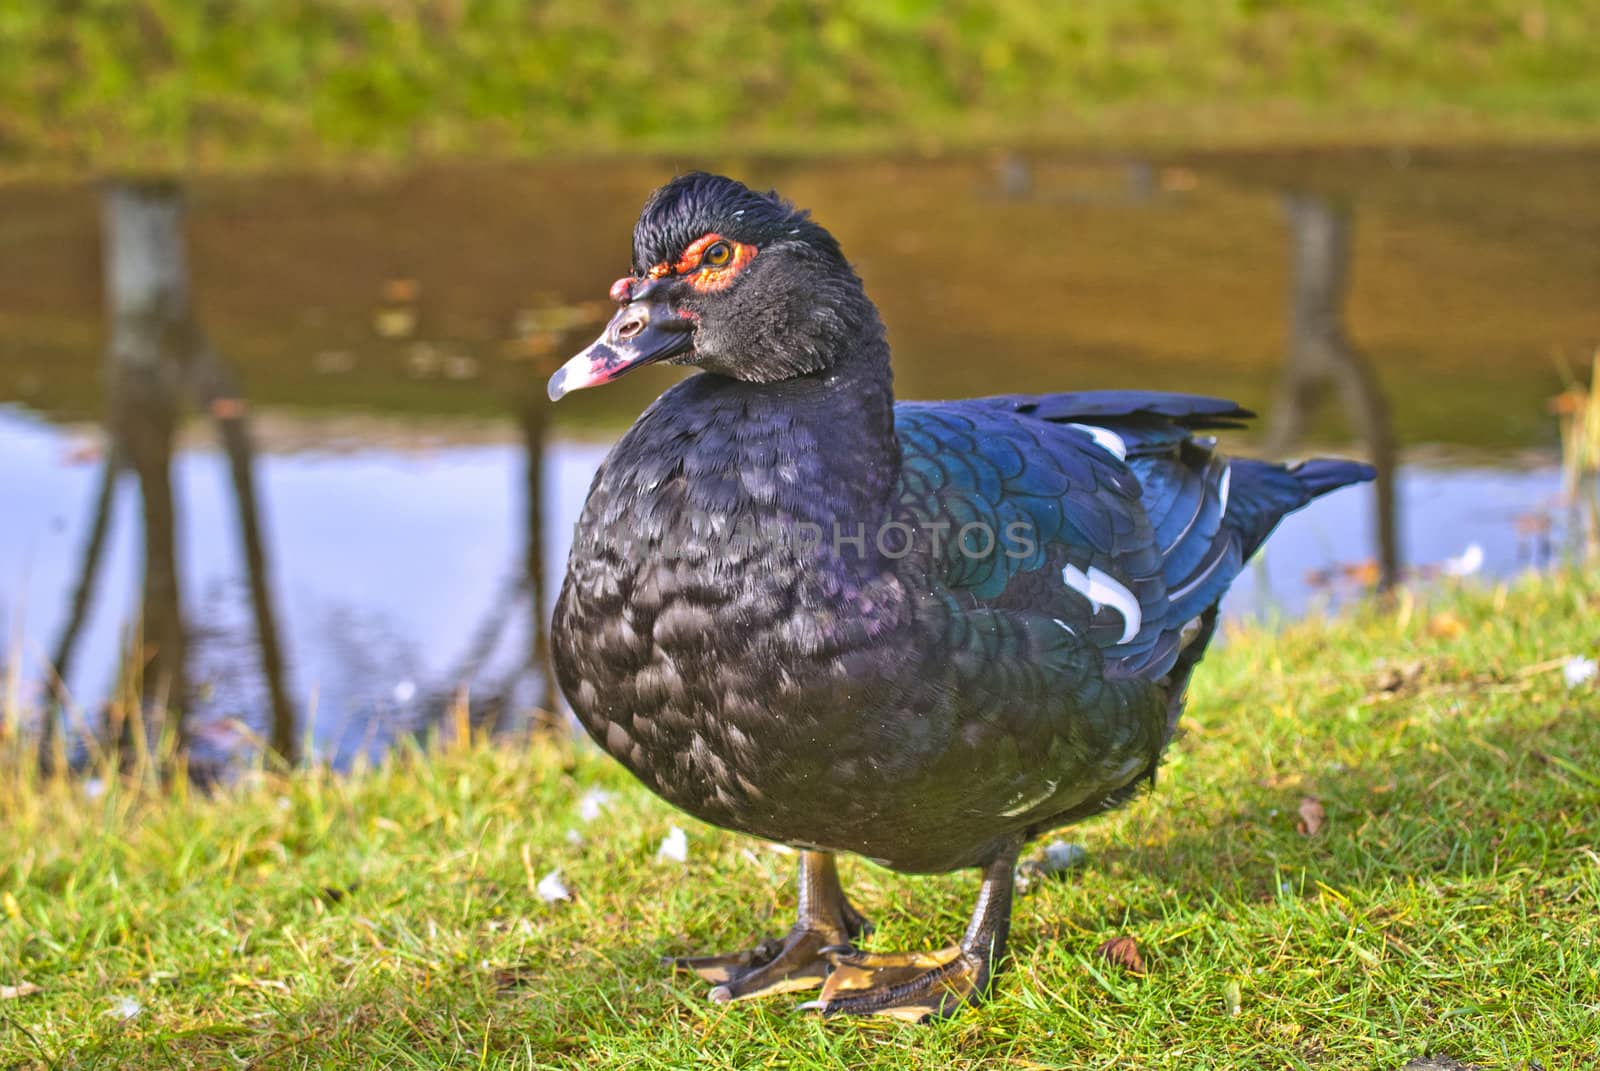 the muscovy duck (cairina moschata) is a large duck native to mexico, central, and south america. the pictures are shot at the duck pond at fredriksten fortress in halden